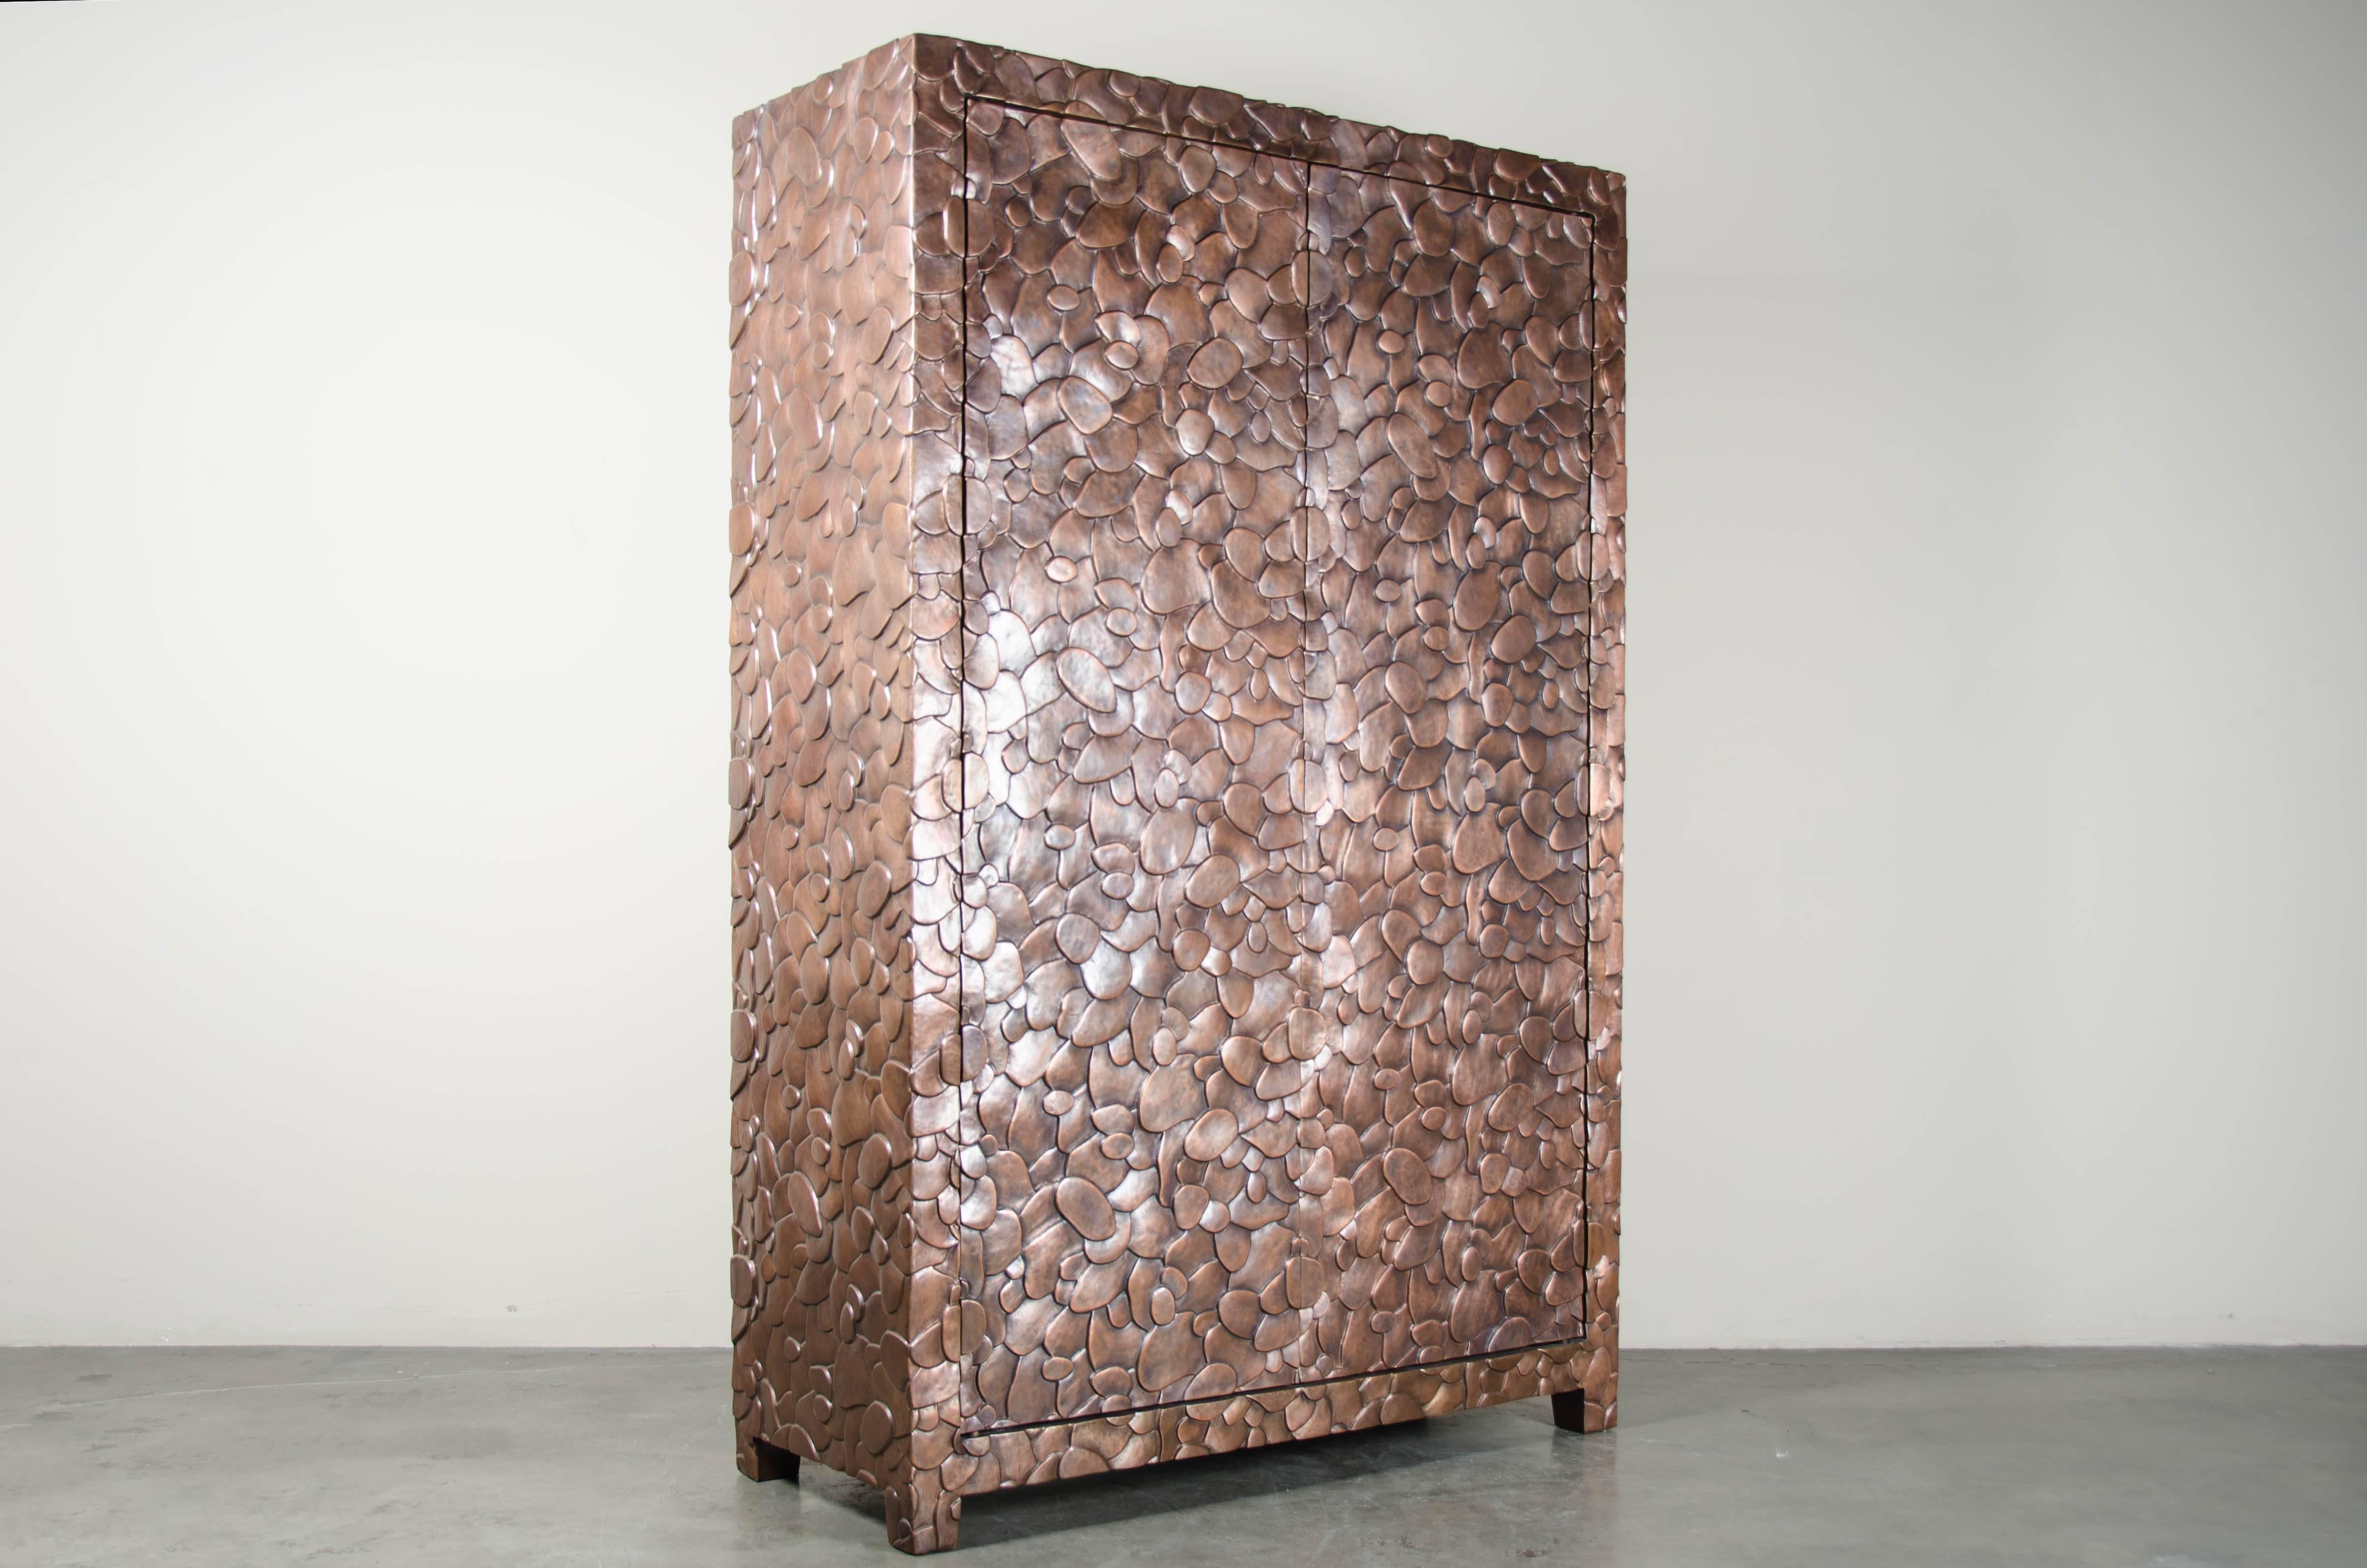 Isola Design Armoire
Antique copper
Hand repoussé
Elmwood
Limited edition

Repousse´ is the traditional art of hand-hammering decorative relief onto sheet metal. The technique originated around 800 BC between Asia and Europe and in Chinese